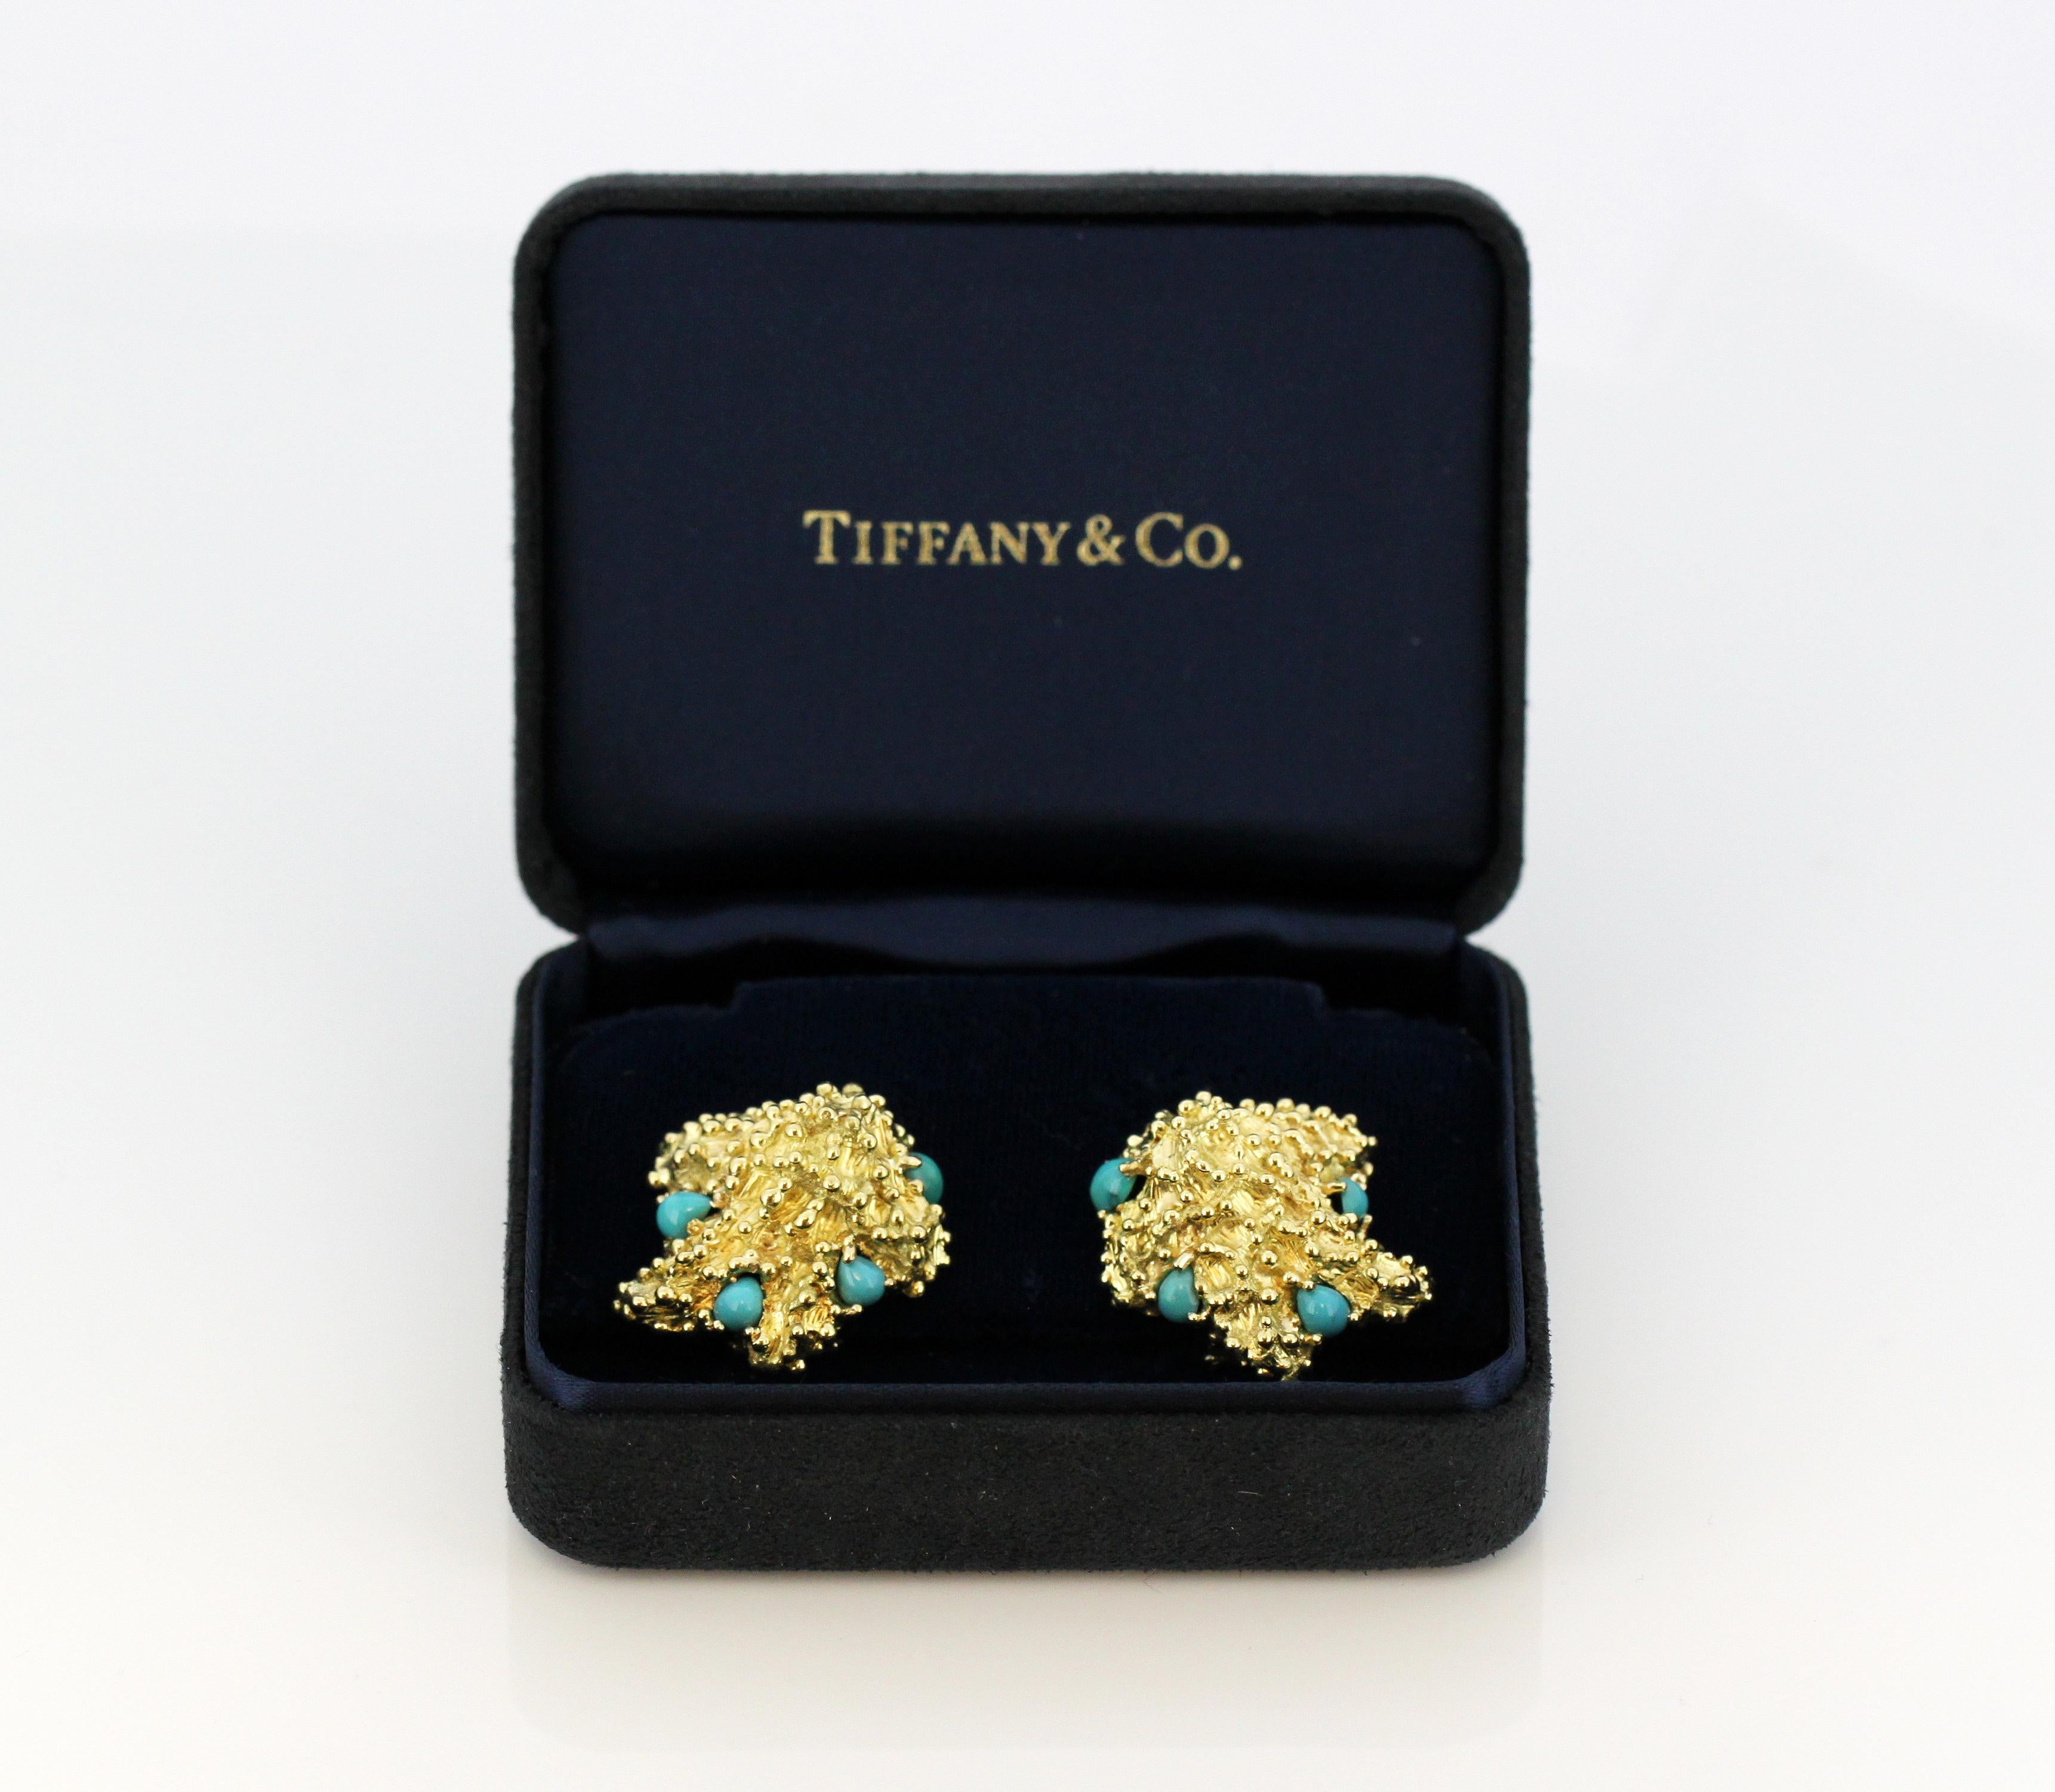 18kt yellow gold ladies clip-on earrings with turquoises.
Designer: Tiffany & Co
Fully hallmarked 18kt gold.
Made in Italy Circa 1990's

Dimension - 
Size : 2.8 x 2.1 x 1.5 cm
Weight : 25 grams

Condition: Earrings are pre-owned, minor wear and tear